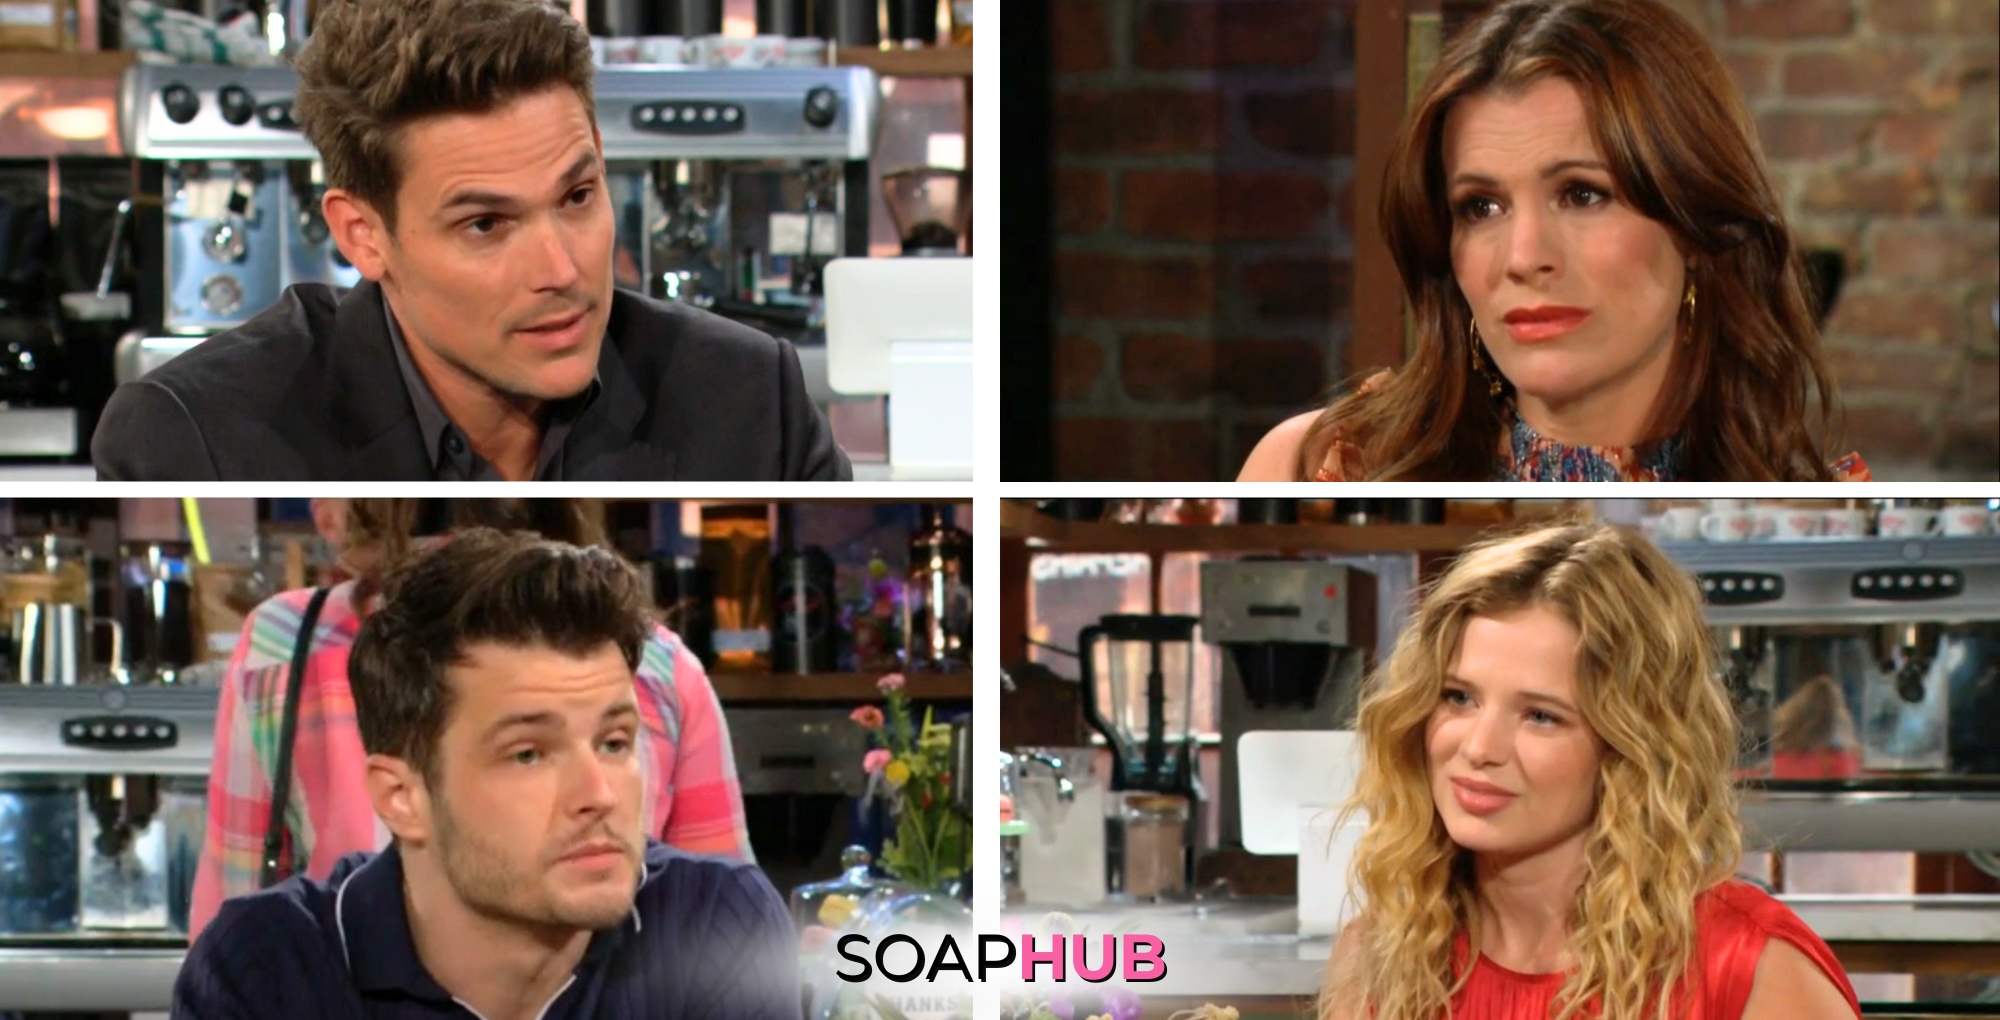 The Young and the Restless spoilers for Friday, March 15 feature Adam, Chelsea, Kyle, and Summer with the Soap Hub logo across the bottom.